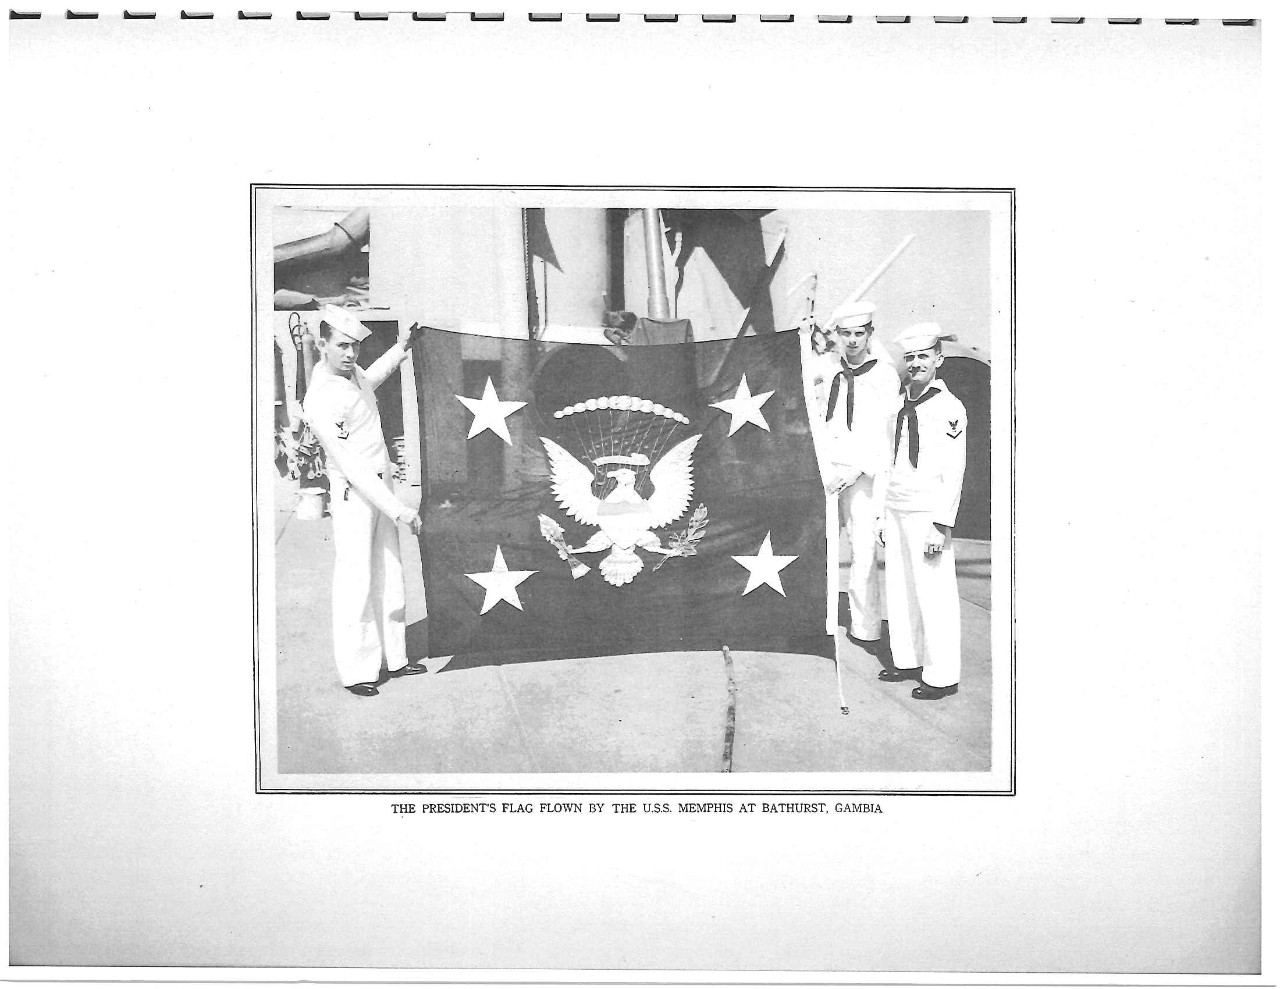 President's flag flown by the USS Memphis at Bathurst, Gambia